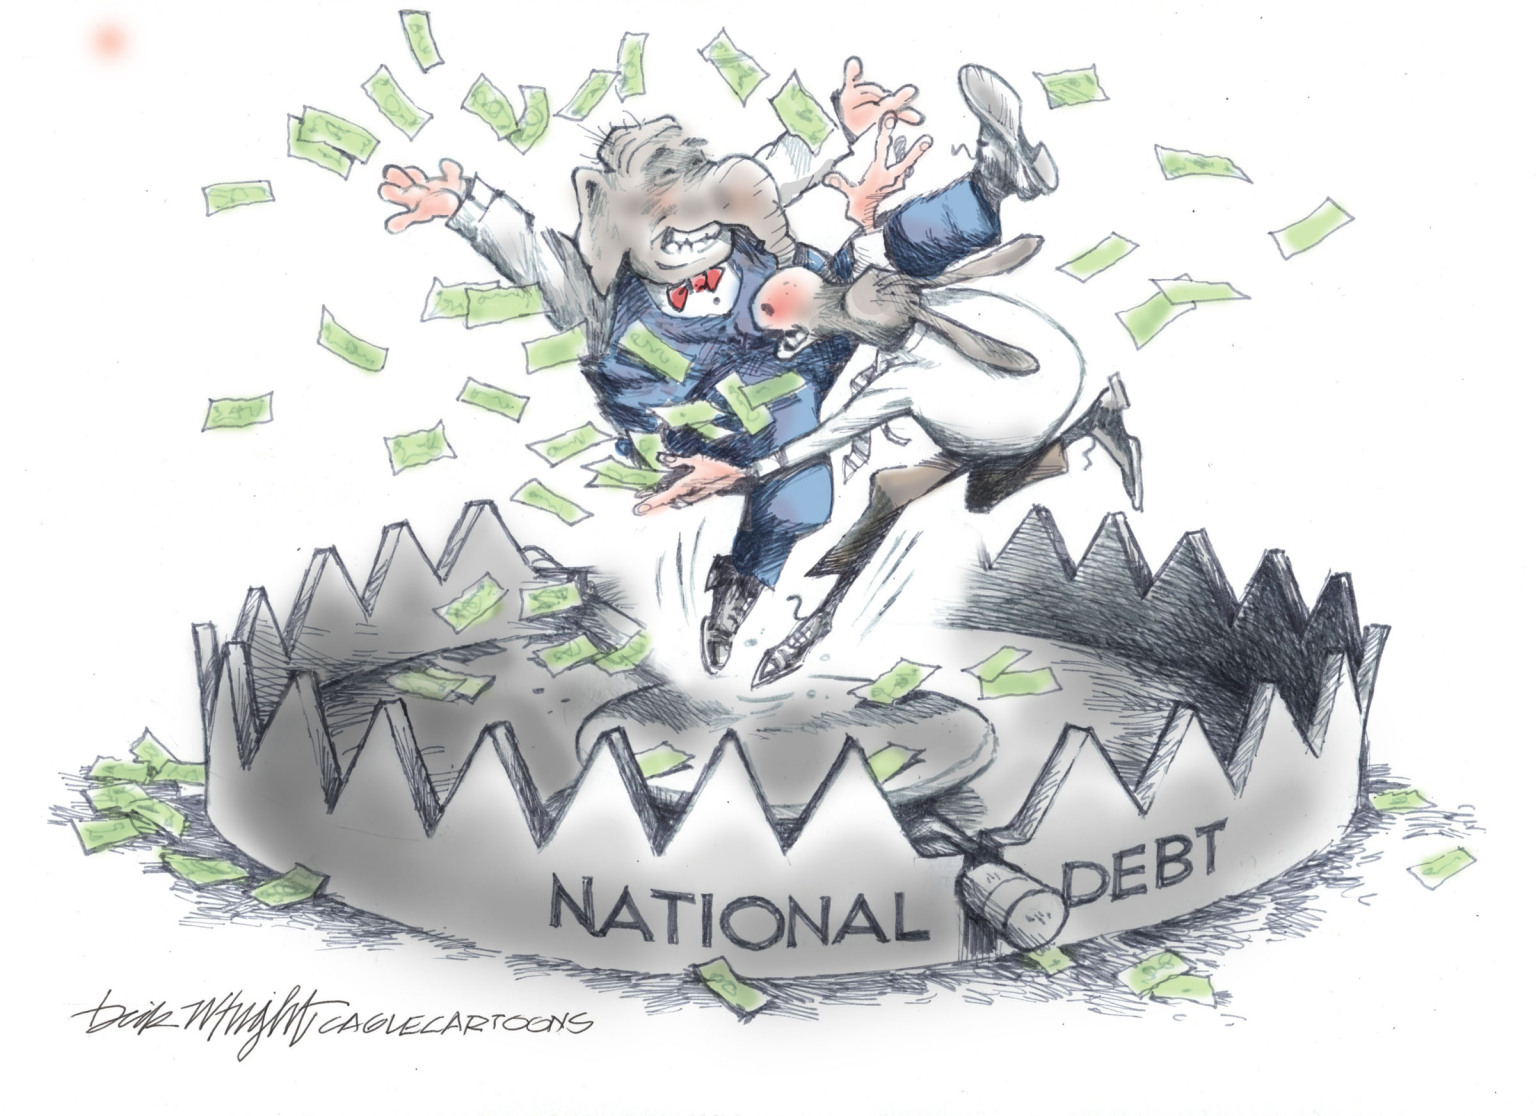 National Debt - By Dick Wright